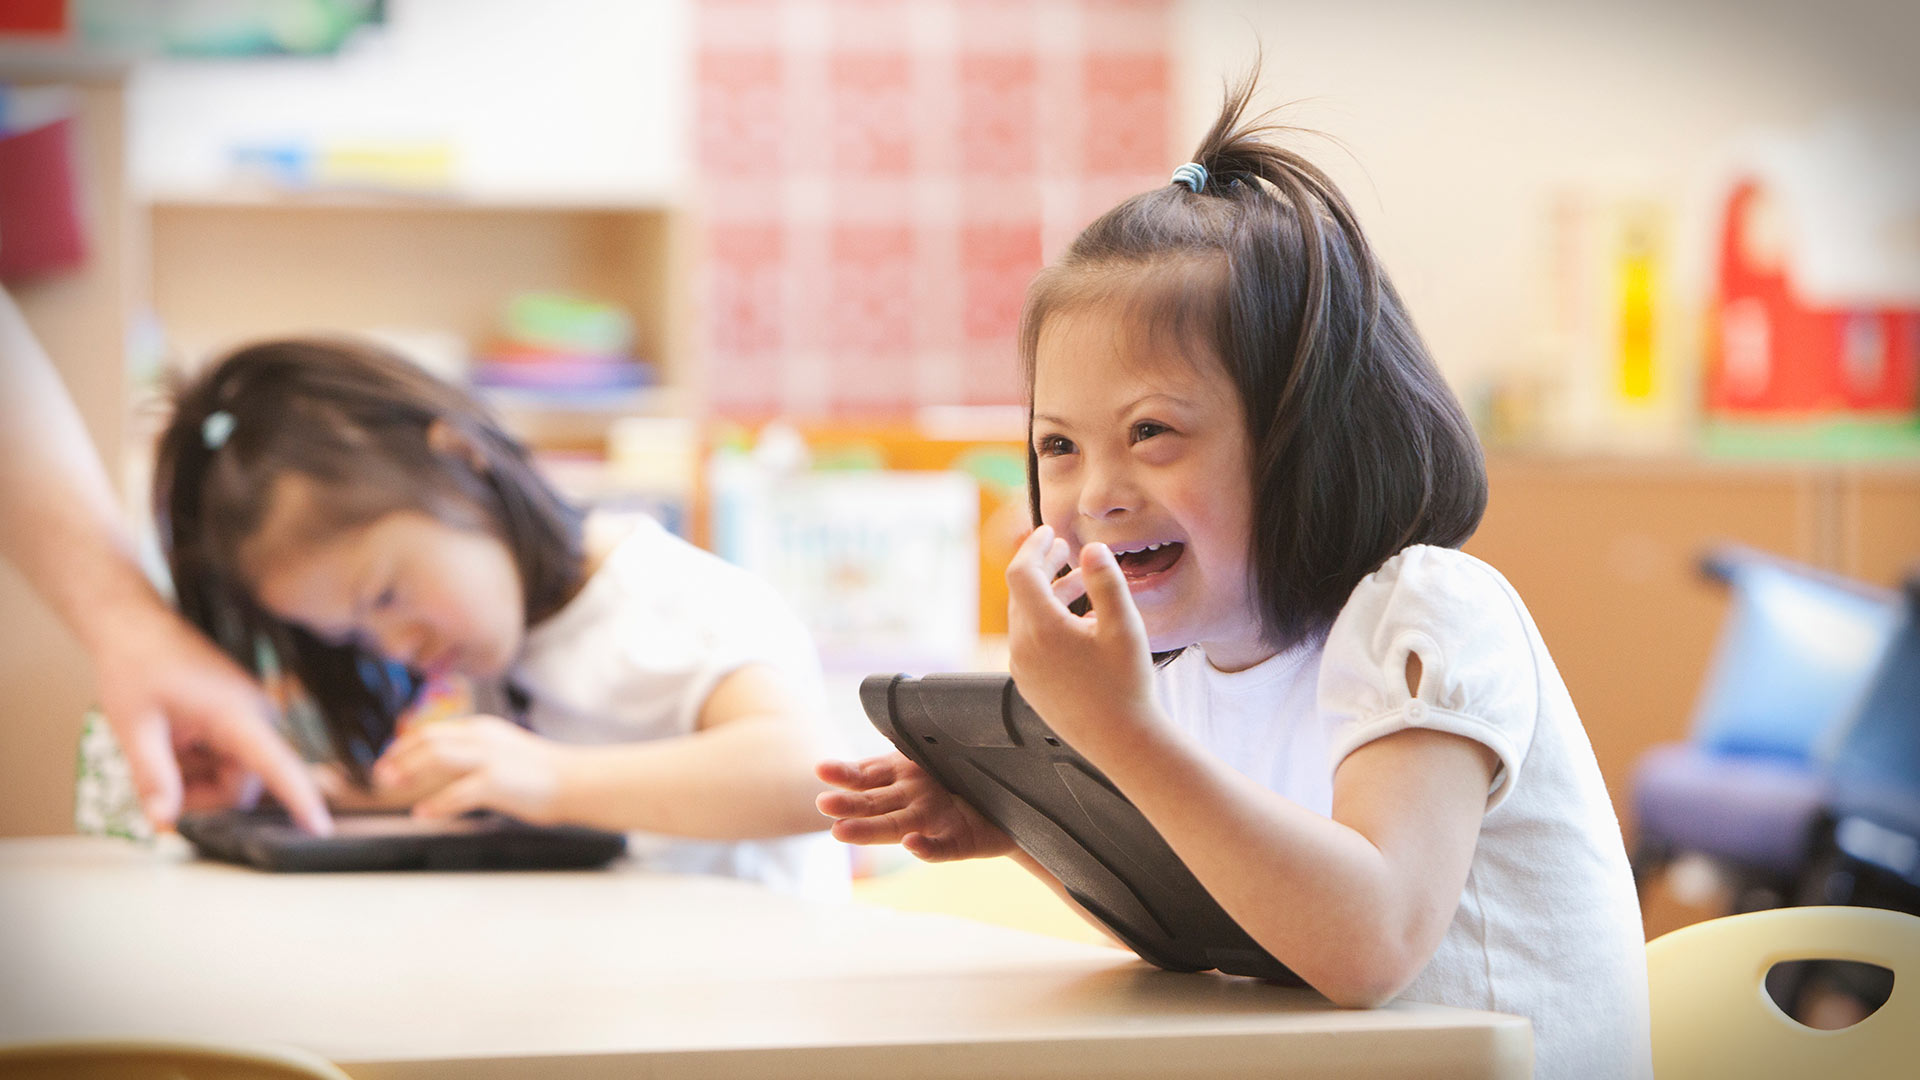 Child laughing sitting at desk